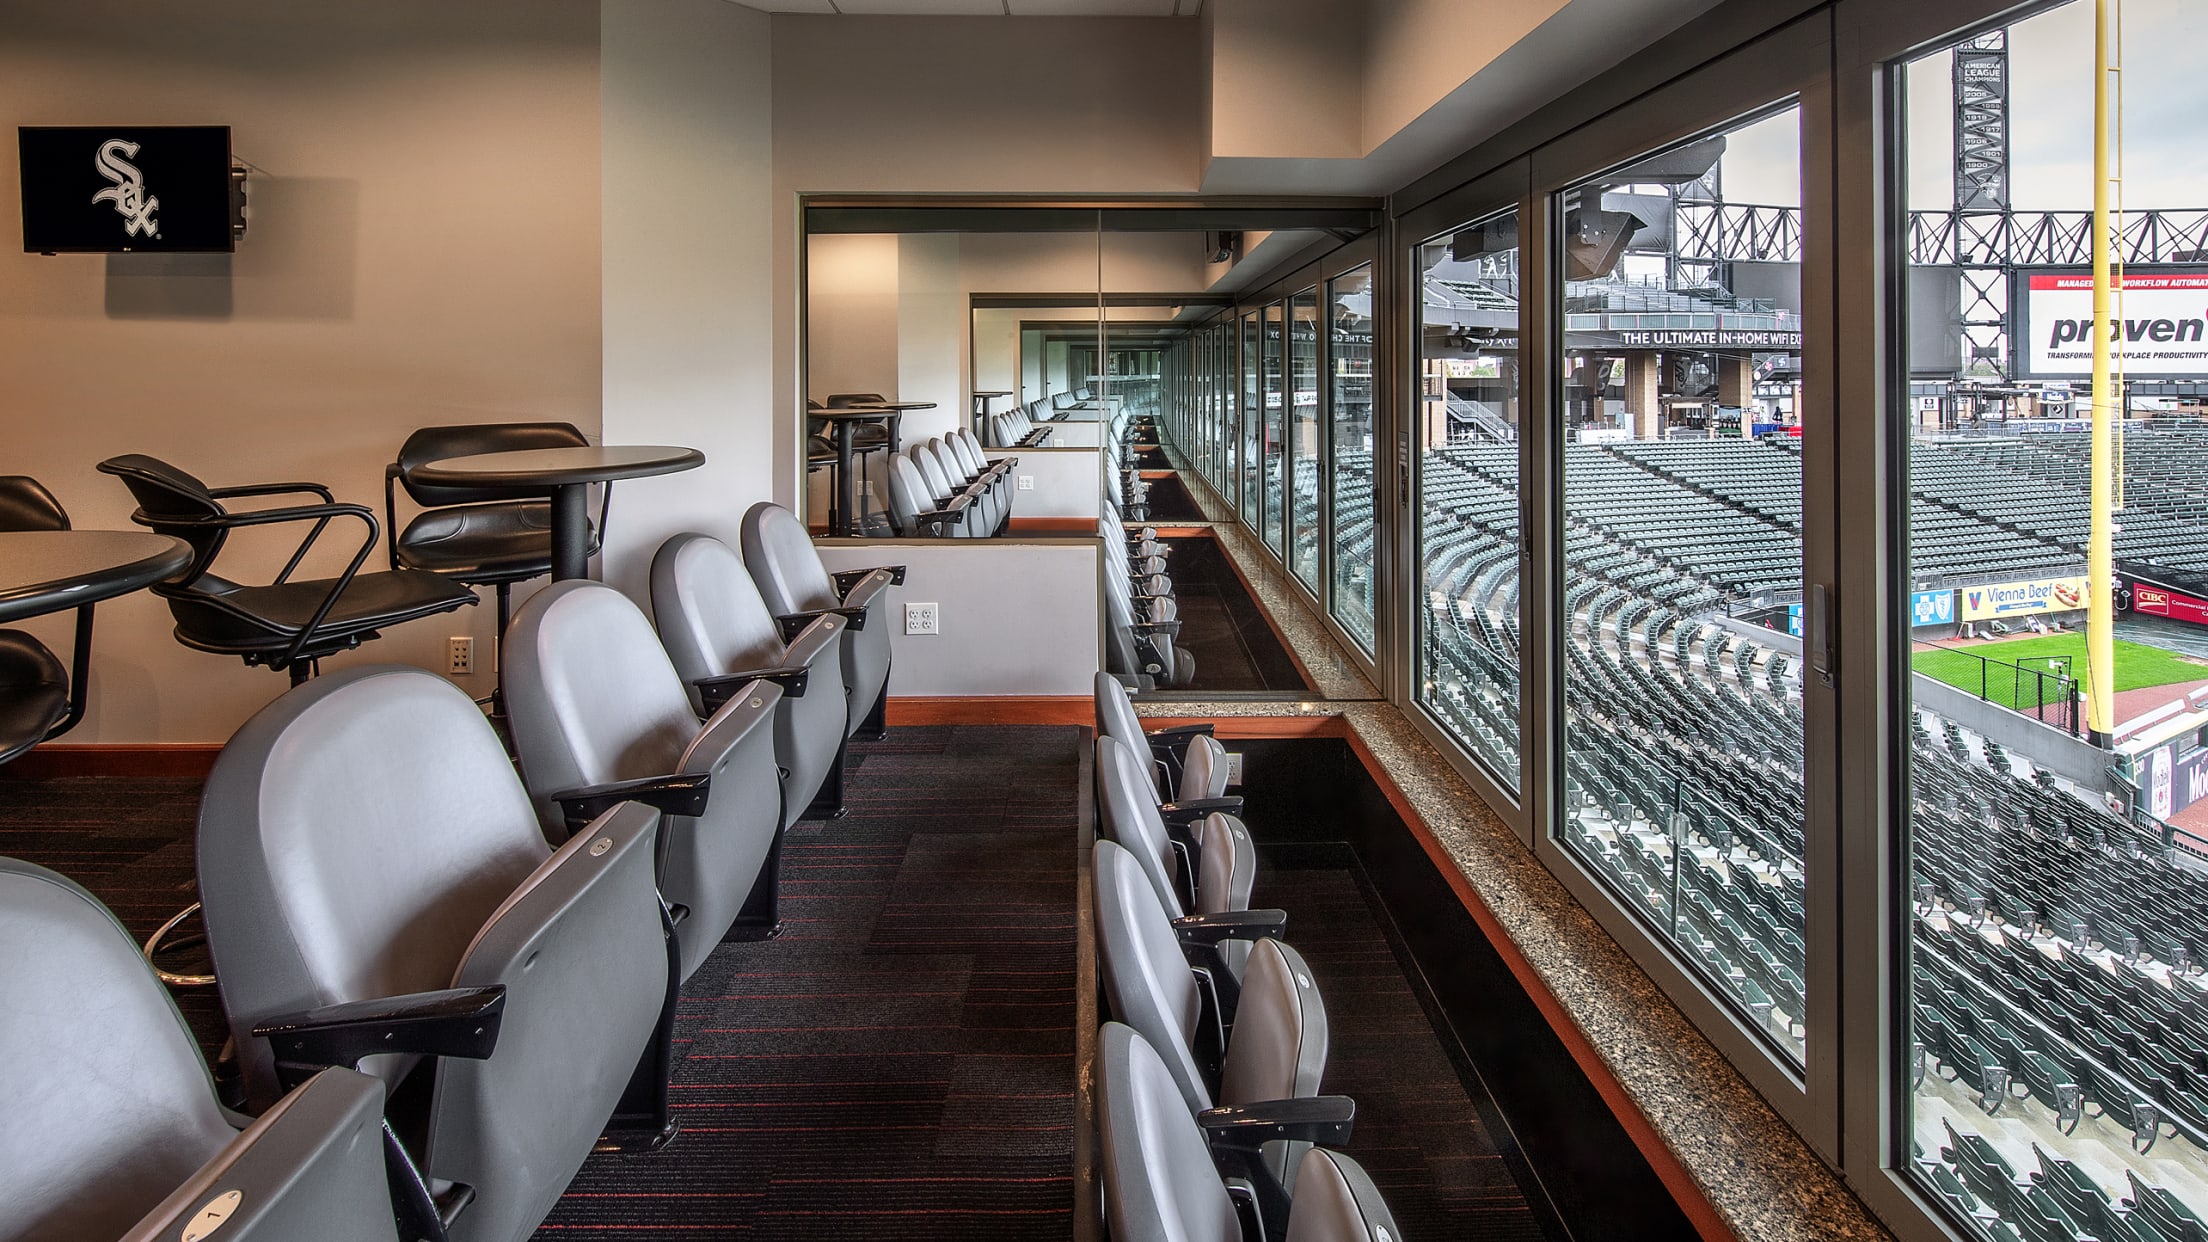 Section 348 at Guaranteed Rate Field 